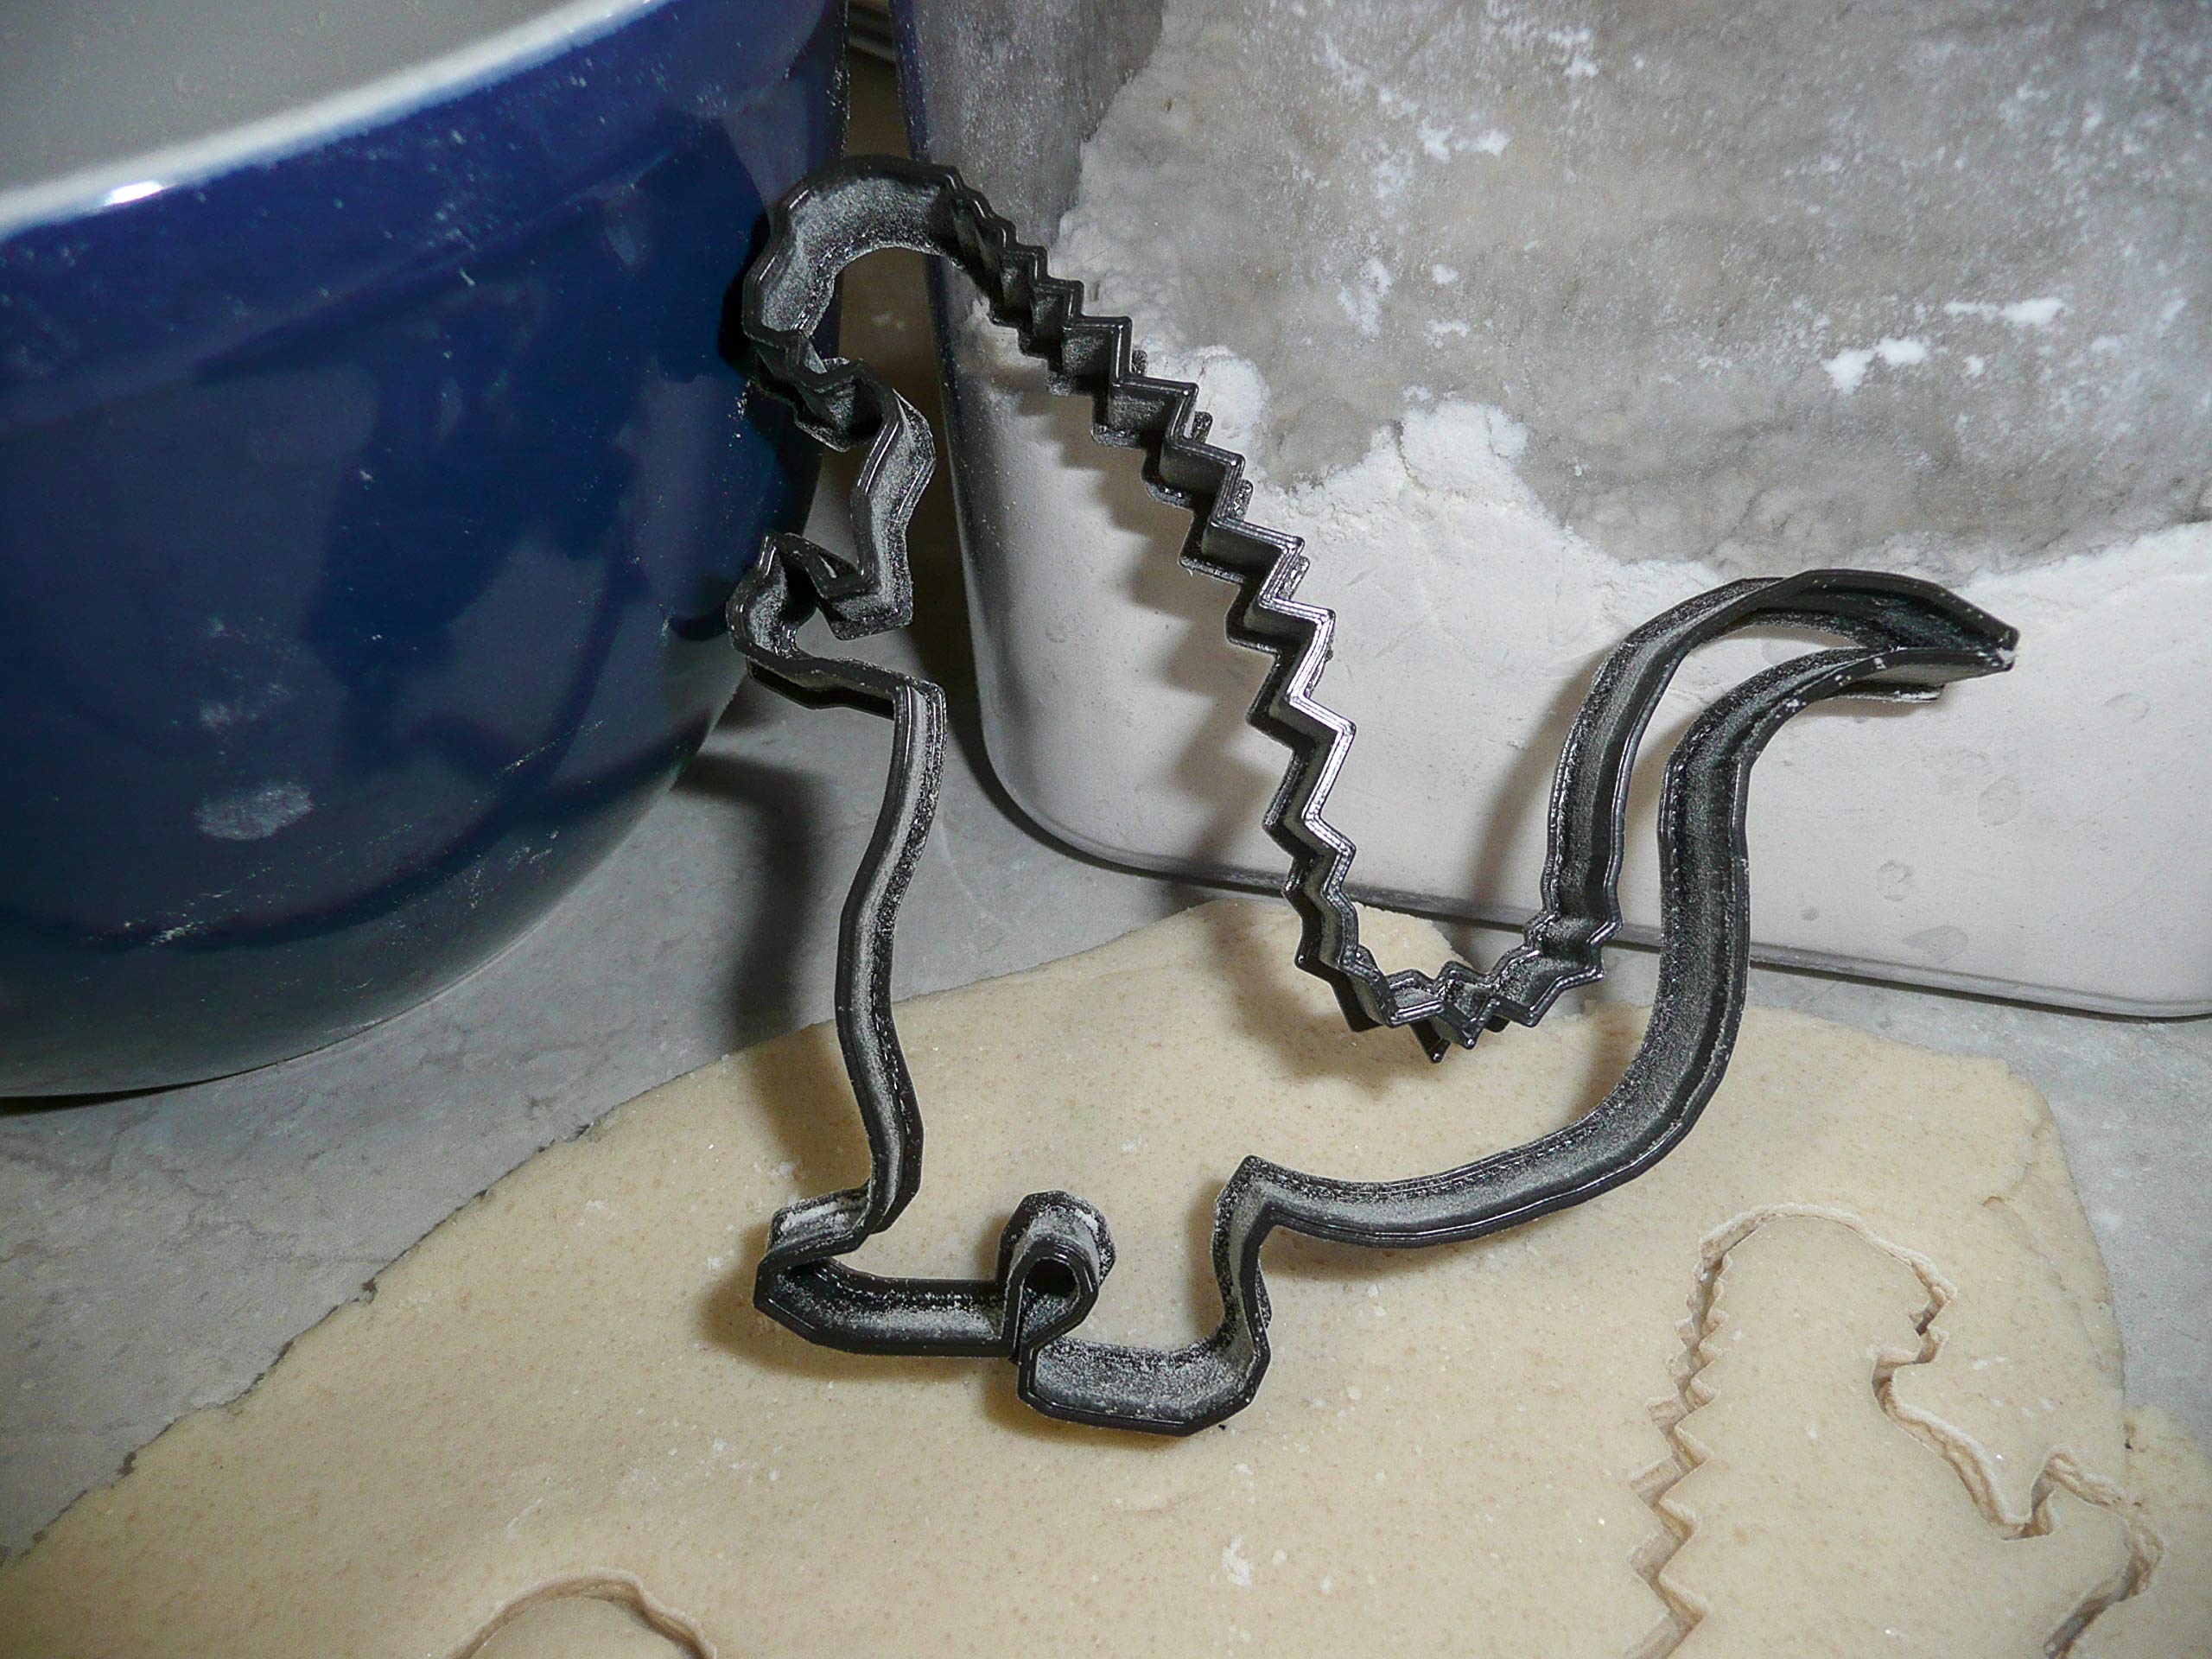 INSPIRED BY GODZILLA REPTILE MONSTER MOVIE CHARACTER COOKIE CUTTER MADE IN USA PR555